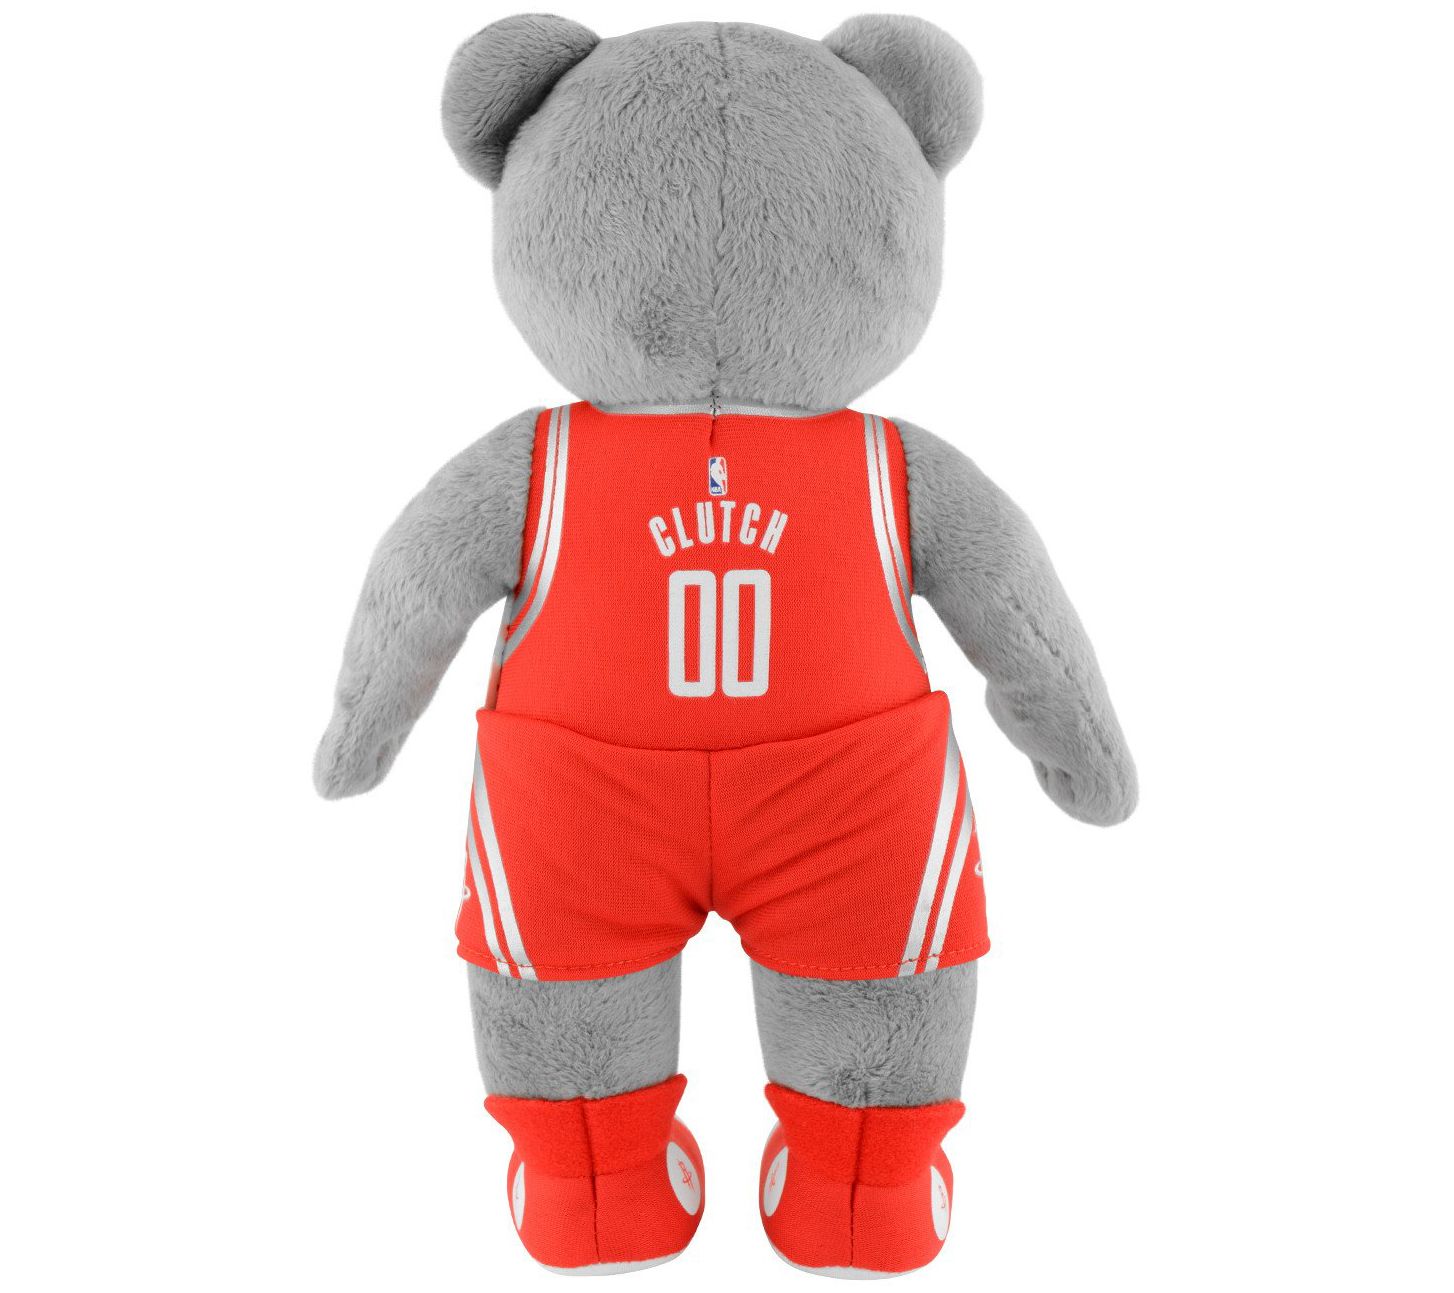 Bleacher Creatures Houston Rockets Clutch 10 Plush Figure A Mascot for Play or Display